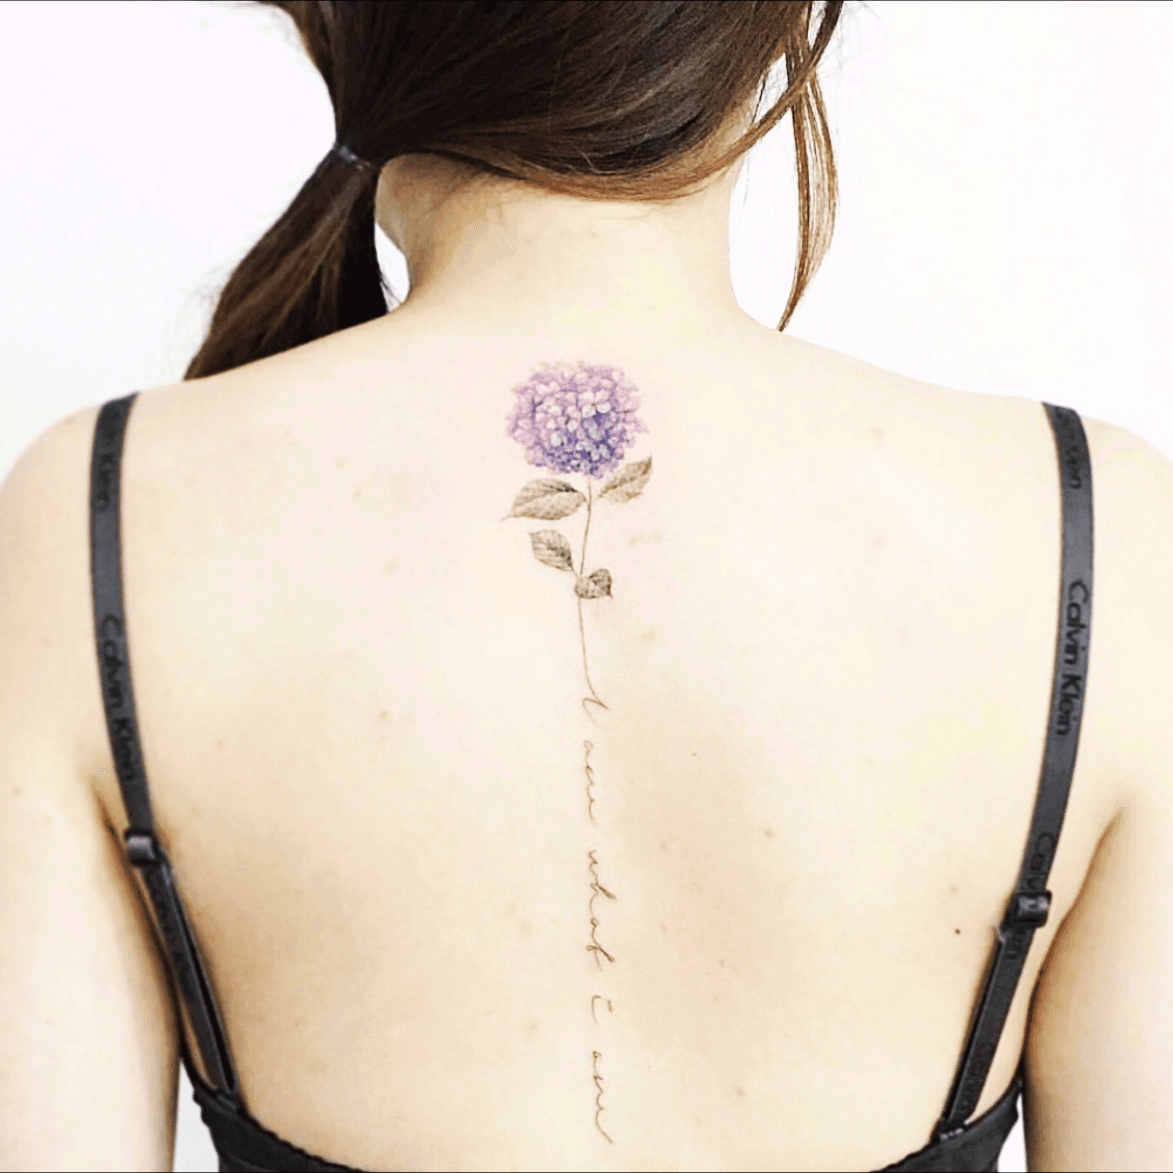 Tattoo Artist for Delicate Looking Spine Tattoo  rlondonontario